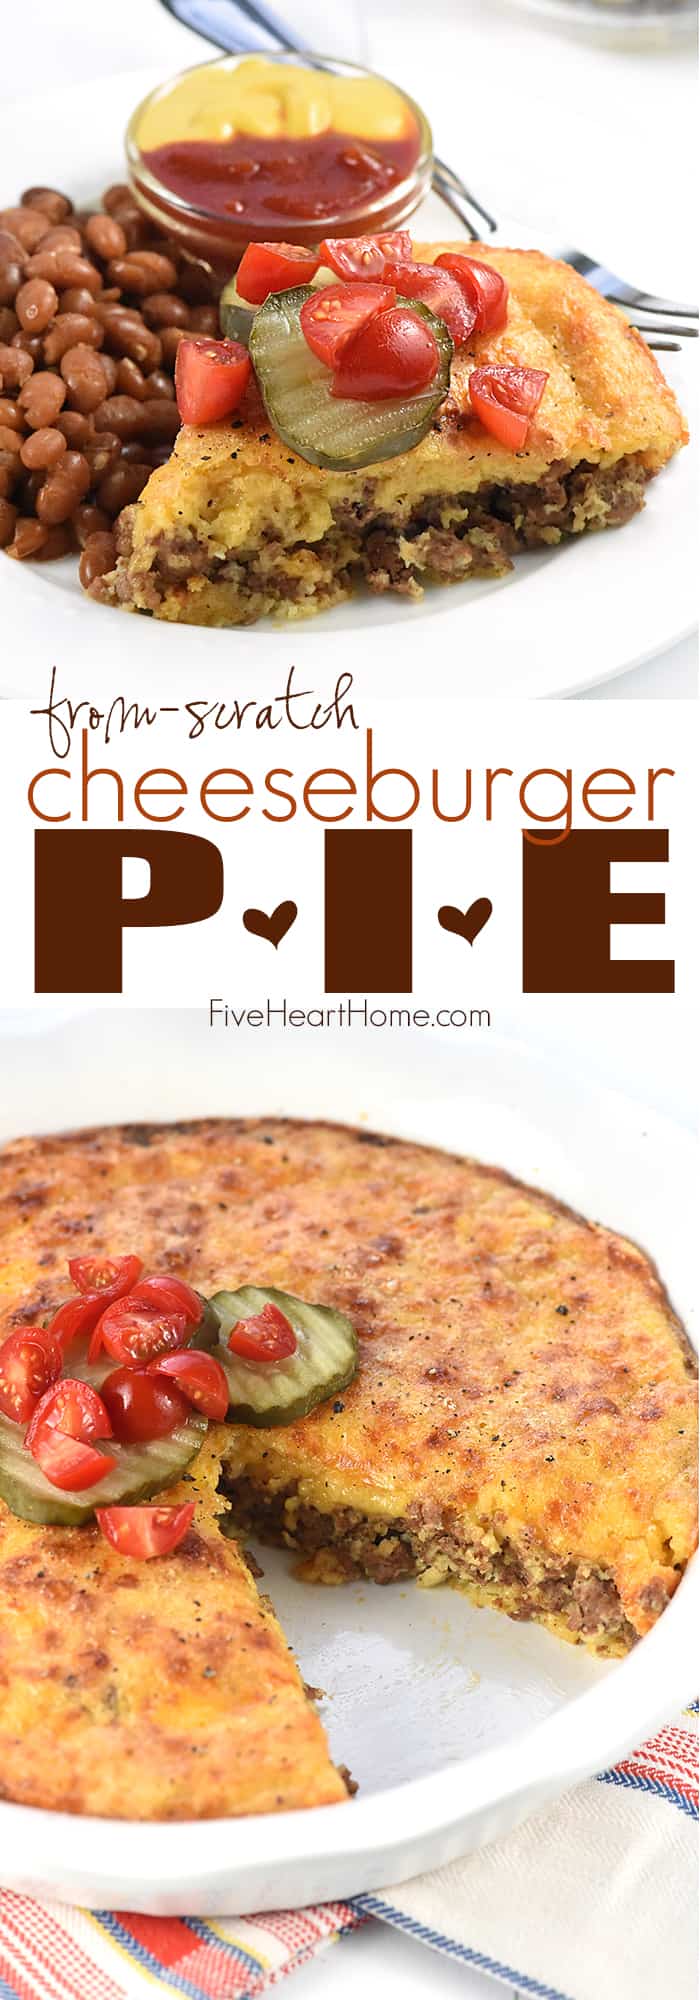 Impossible Cheeseburger Pie without Bisquick ~ a wholesome, from-scratch twist on the classic recipe featuring seasoned ground beef, grated cheddar cheese, and a homemade topping made with whole wheat flour! | FiveHeartHome.com via @fivehearthome